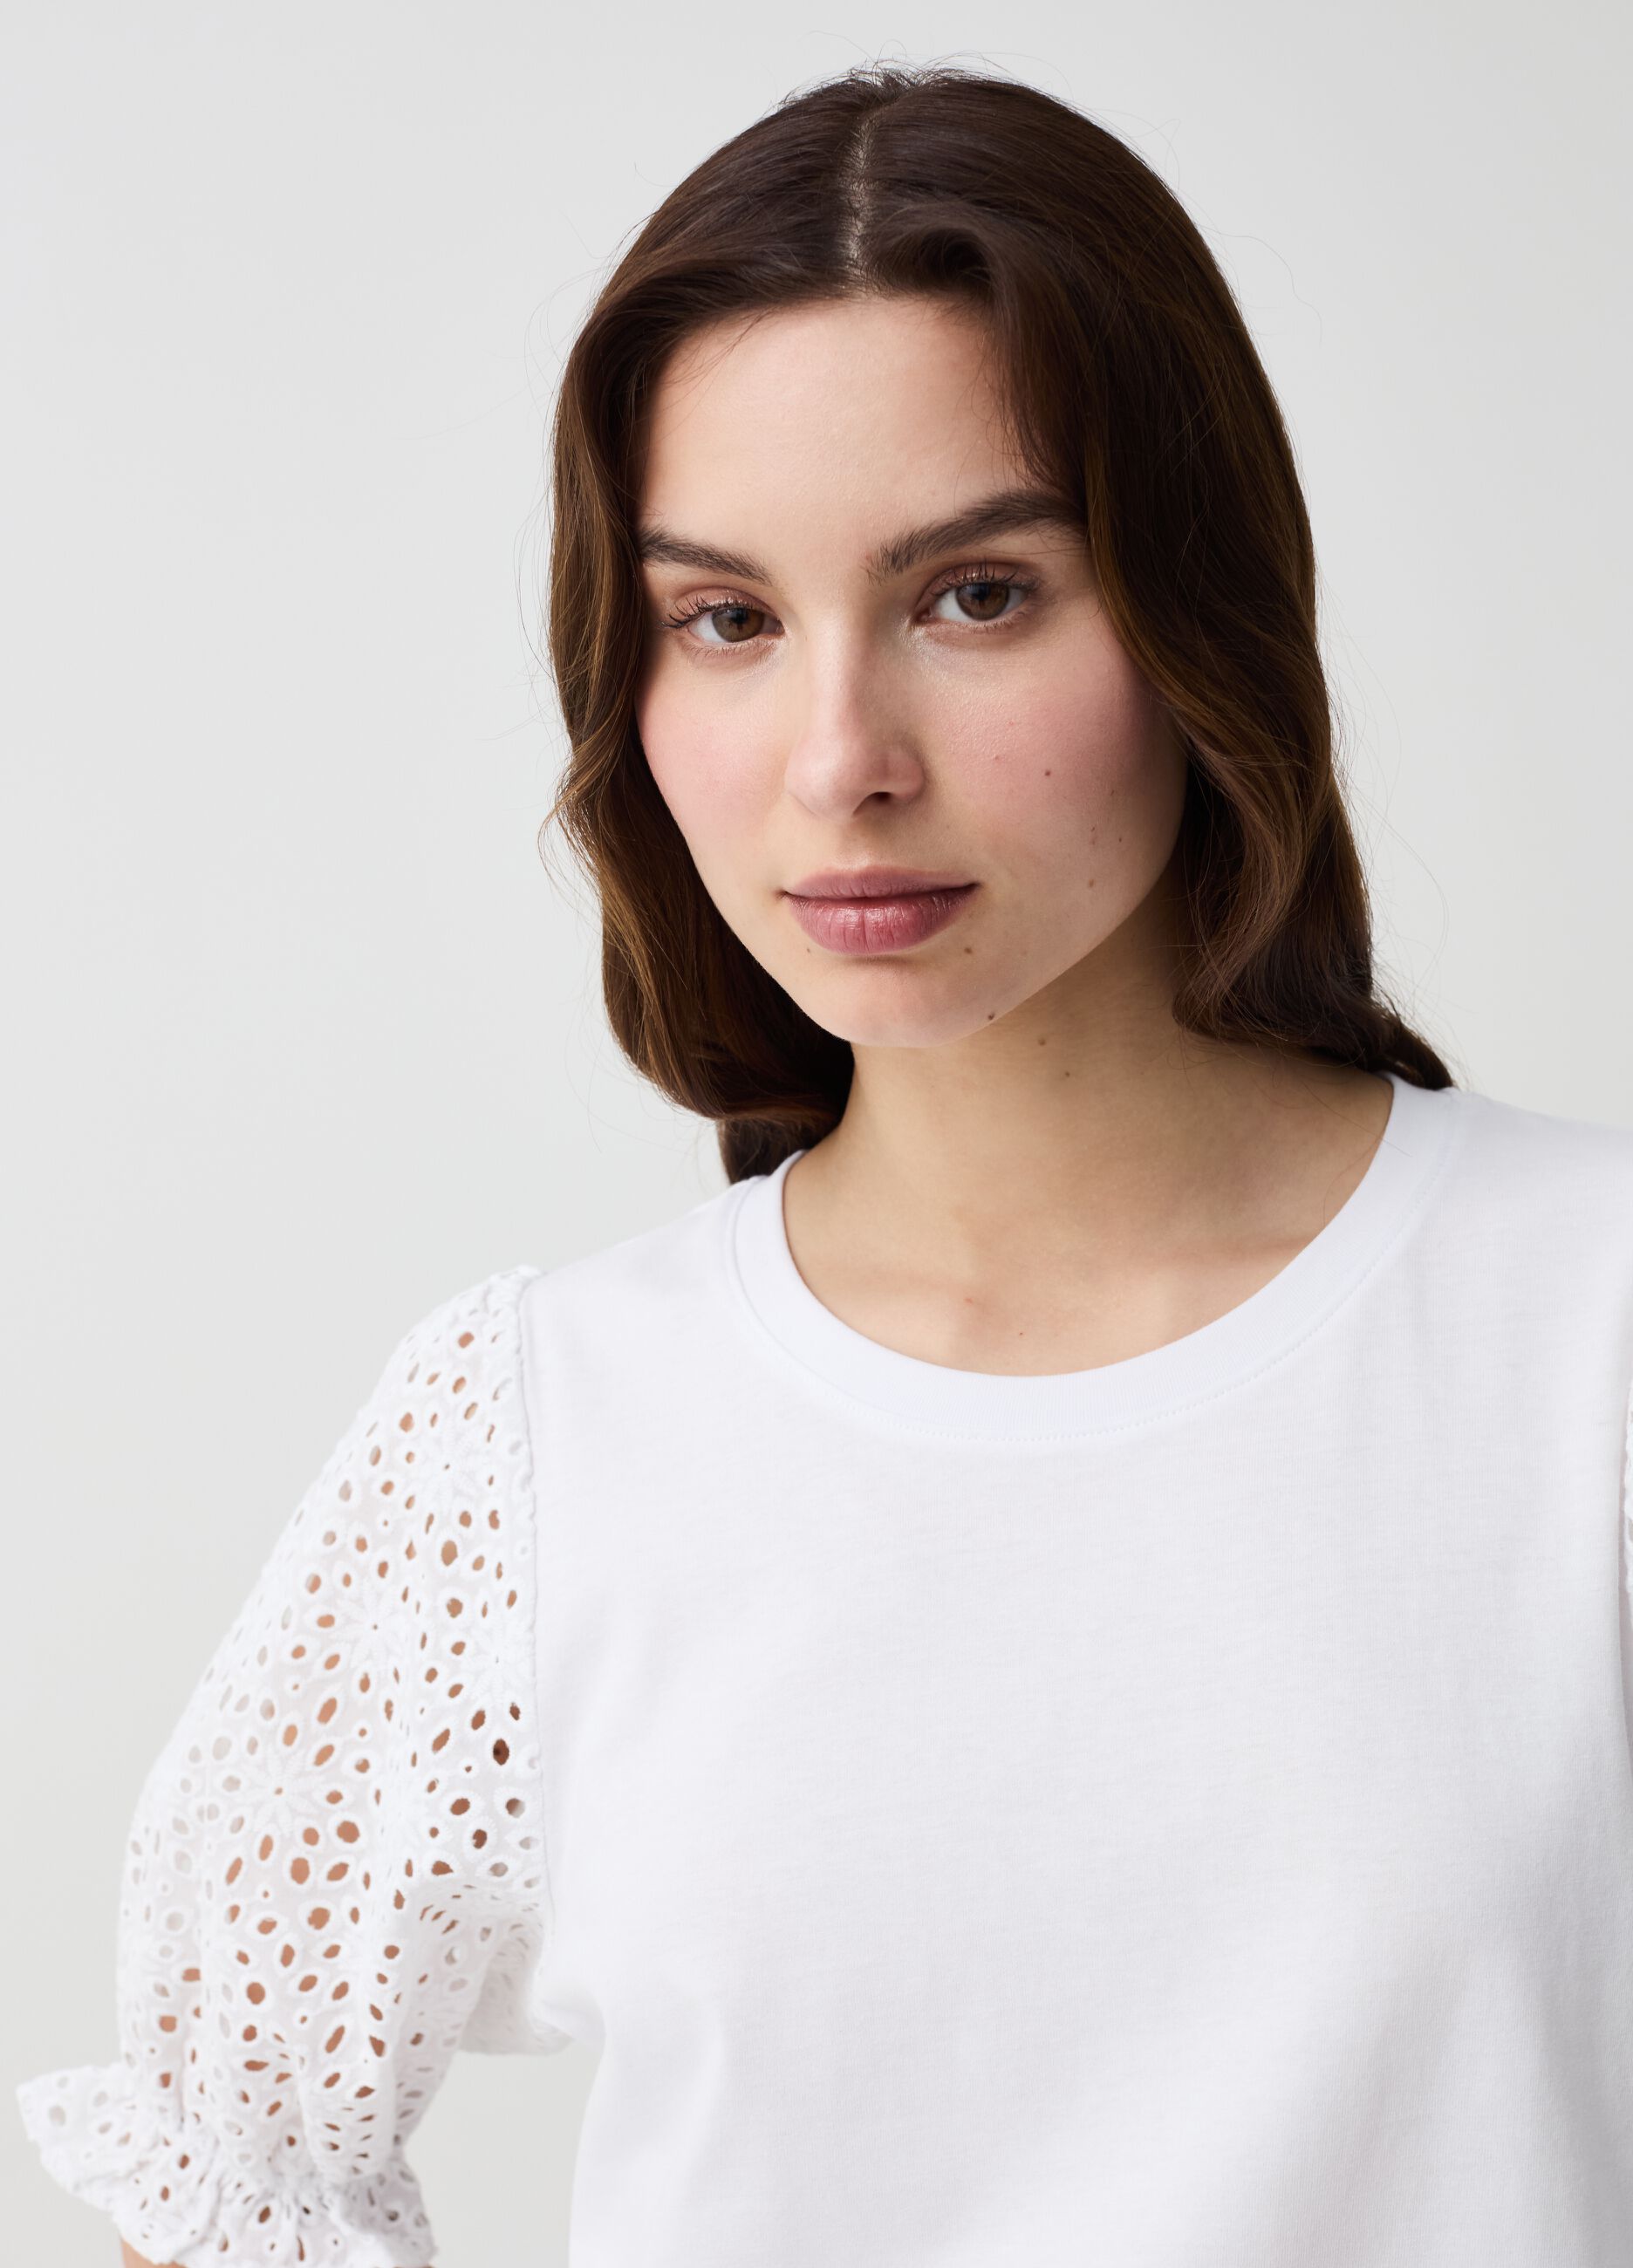 T-shirt with puff sleeves in broderie anglaise